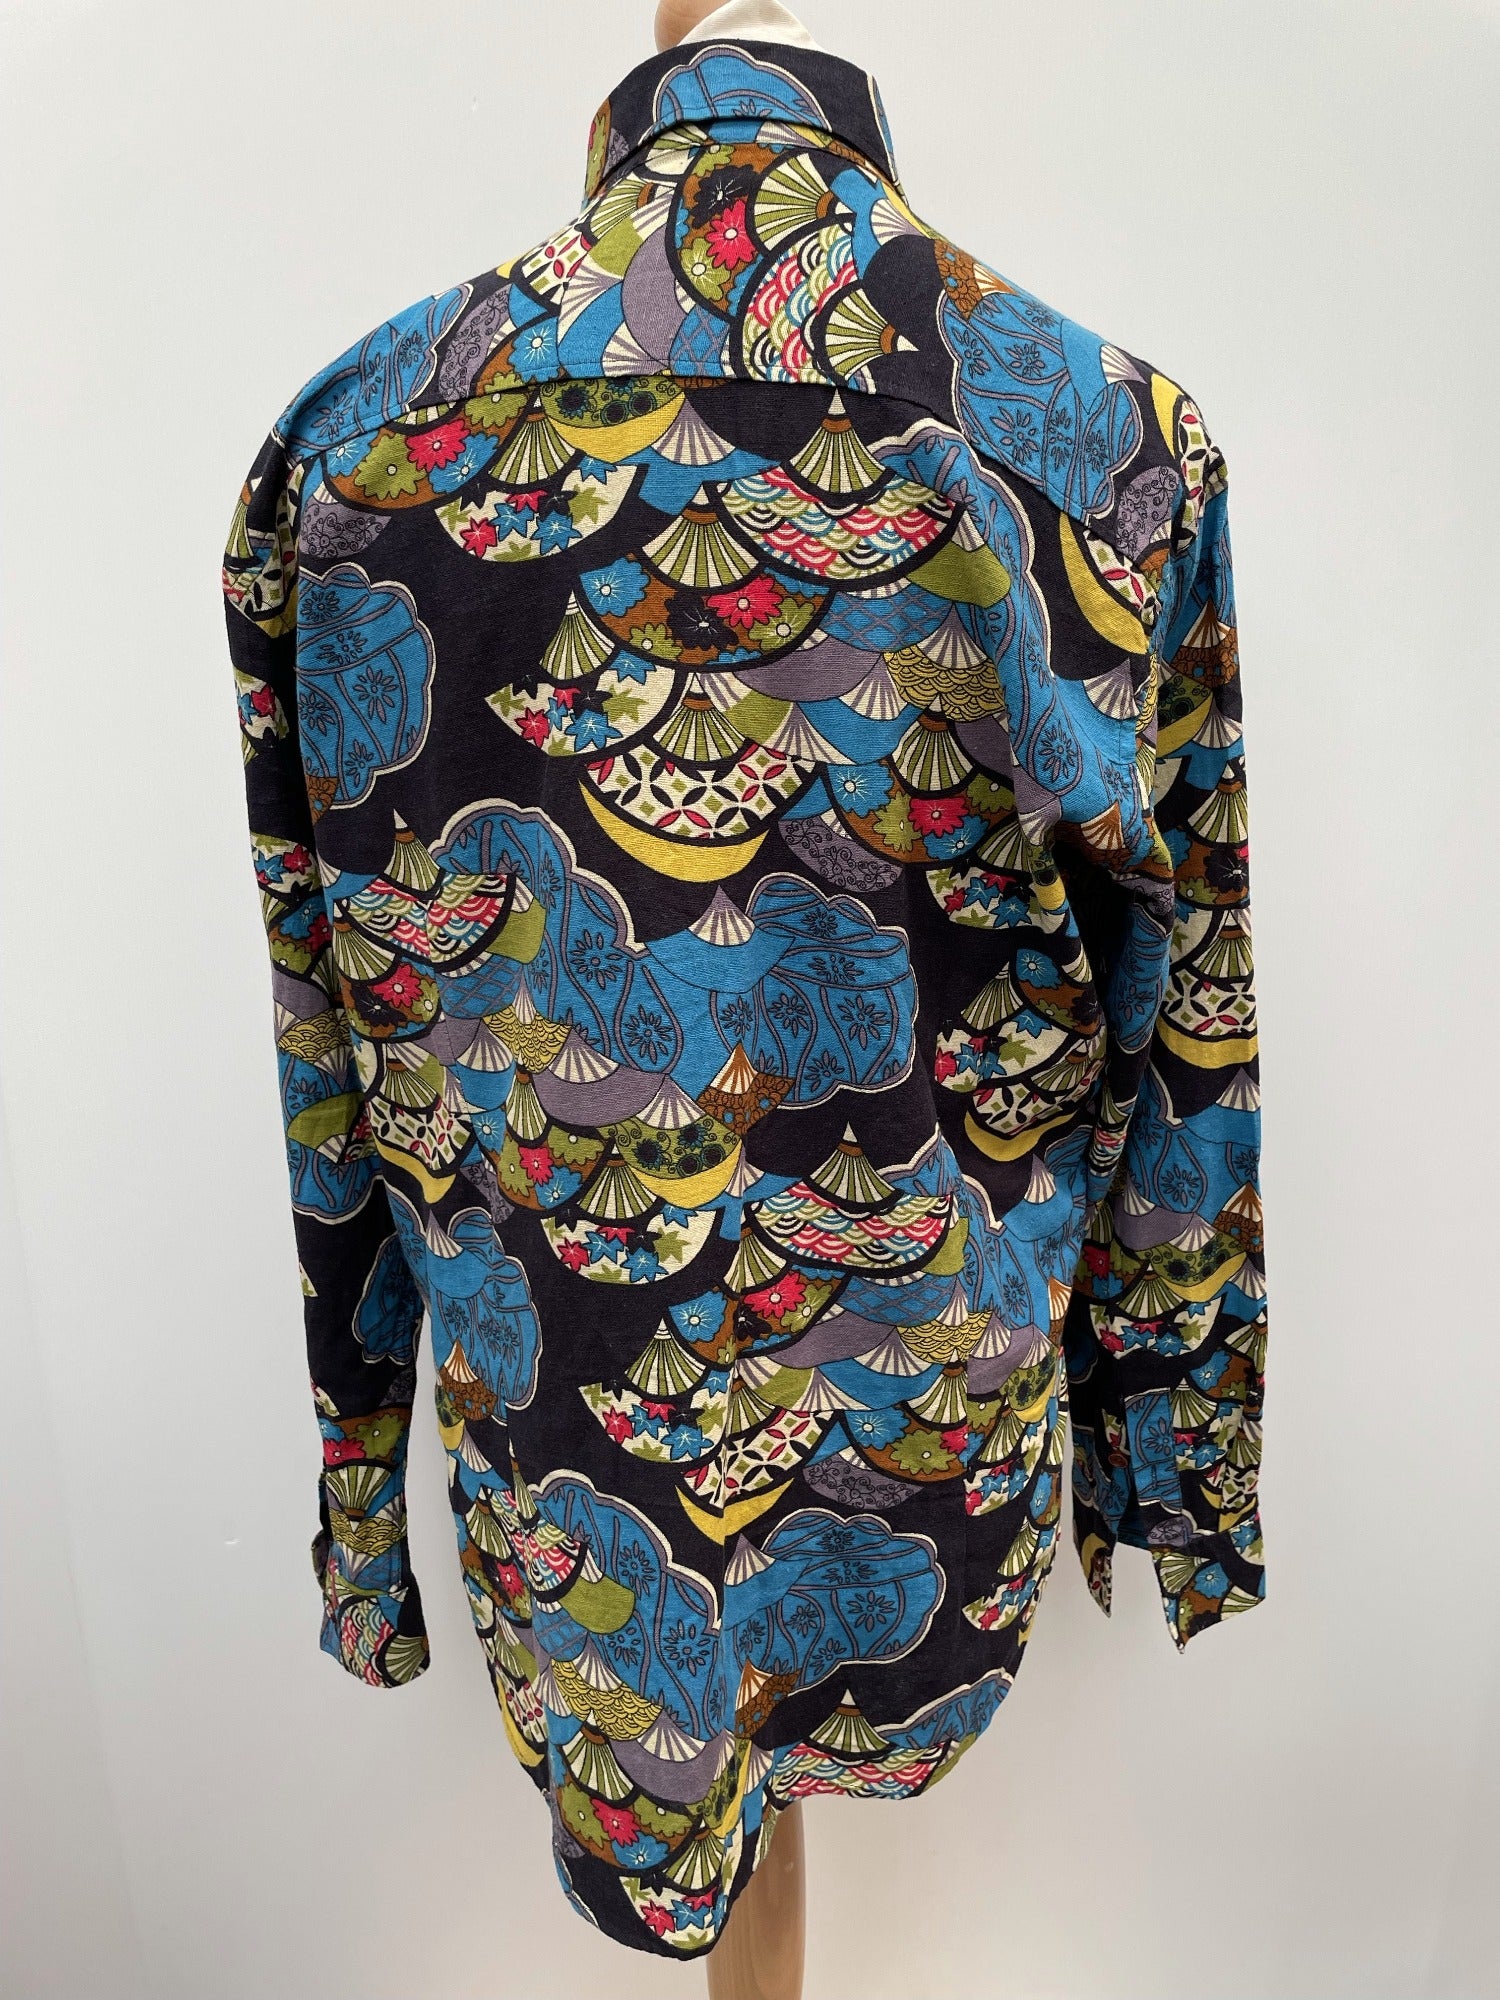 xl  vintage  Urban Village Vintage  urban village  Shirt  retro  psychedelic  psych  printed shirt  patterned  pattern  mens  long sleeves  long sleeve  collar  button down  button  blue